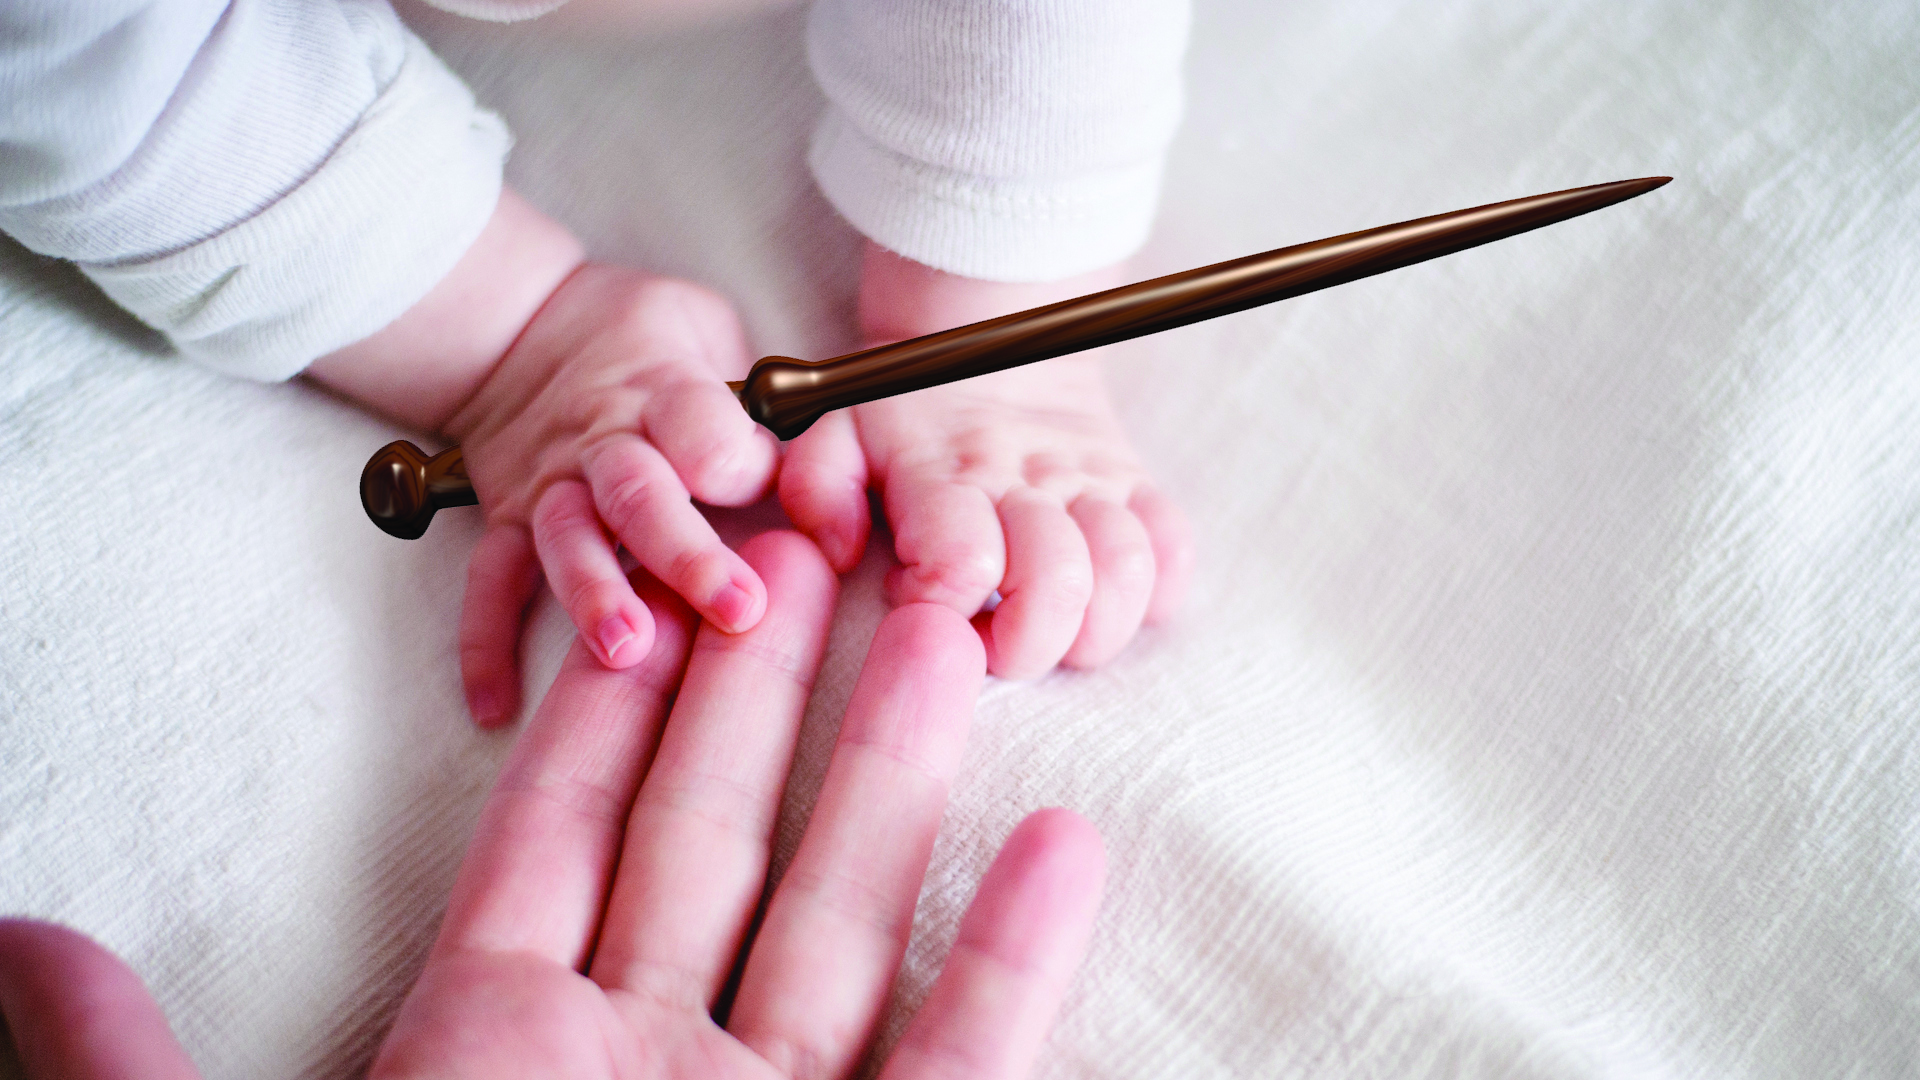 A tiny wizard baby holds a wand